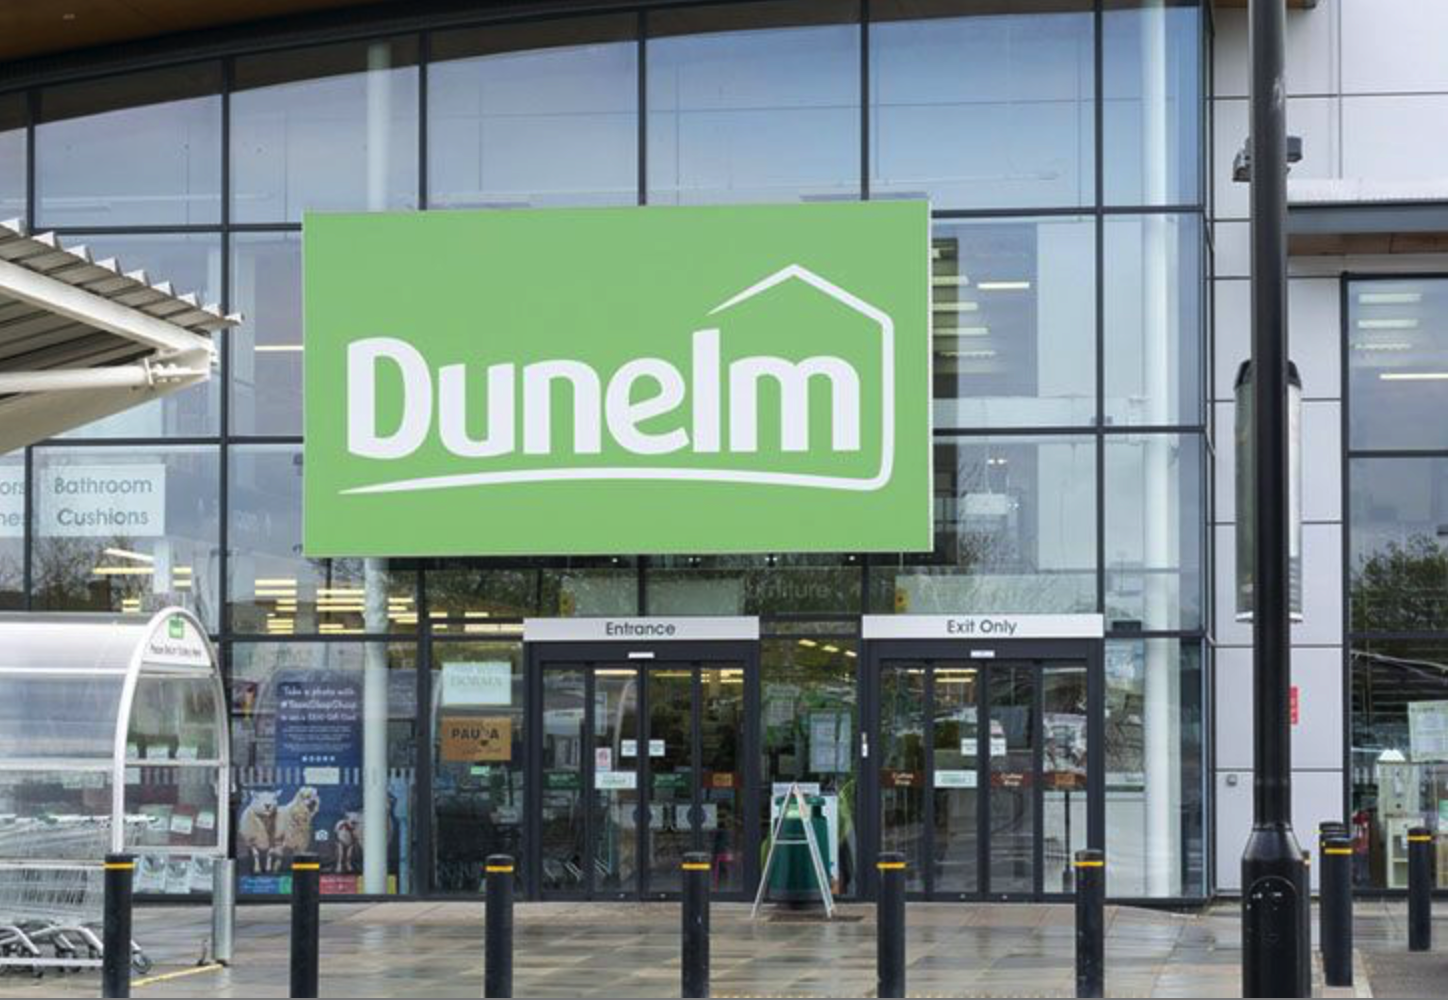 Dunelm sales fell by 8% YoY in 13 weeks to 1 October